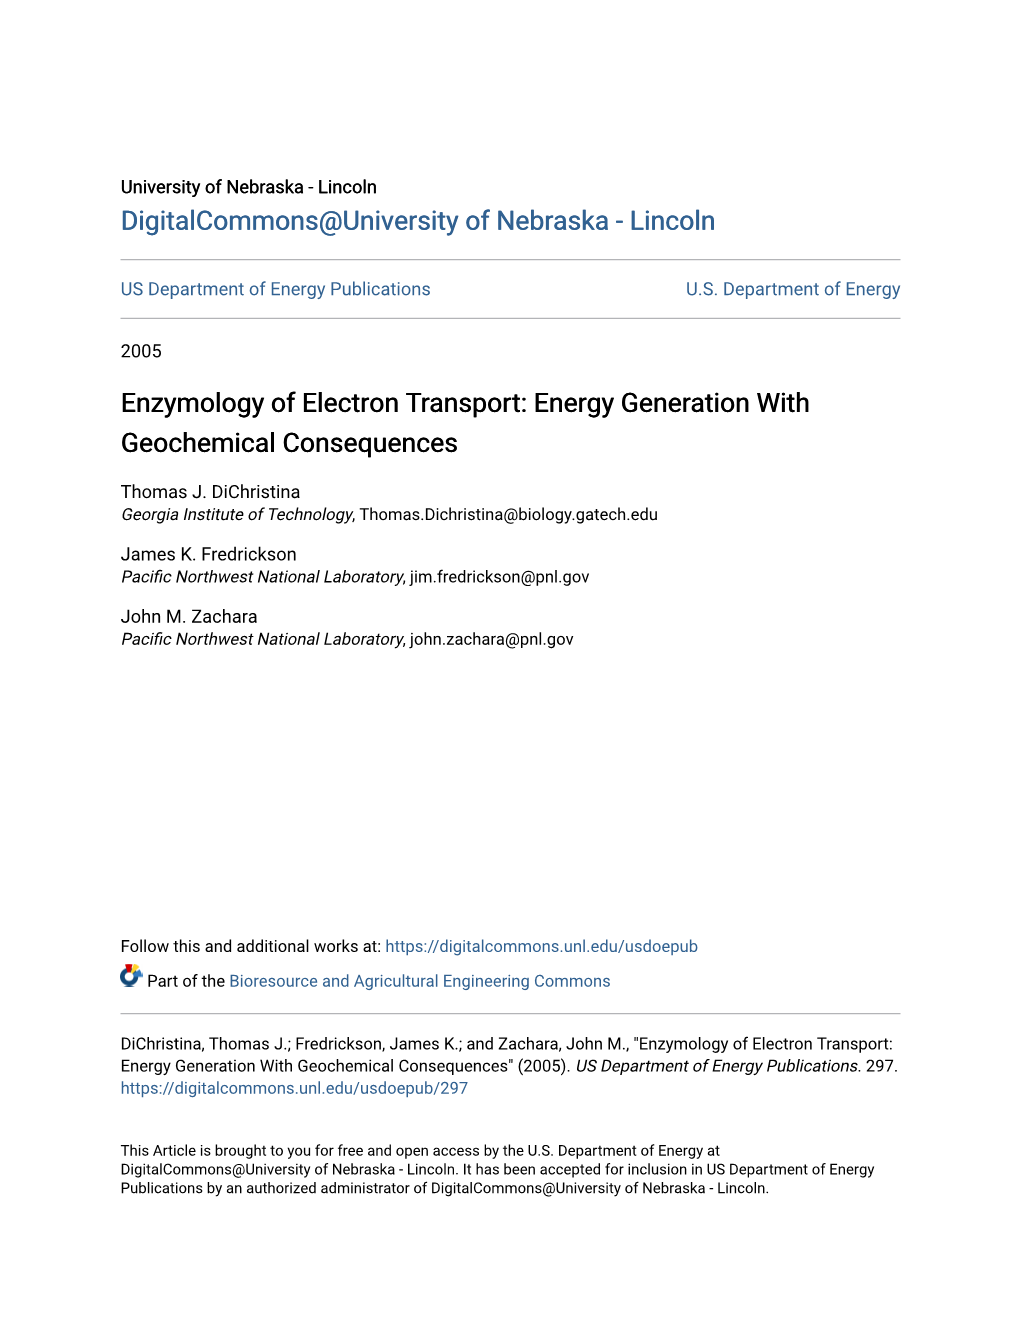 Enzymology of Electron Transport: Energy Generation with Geochemical Consequences